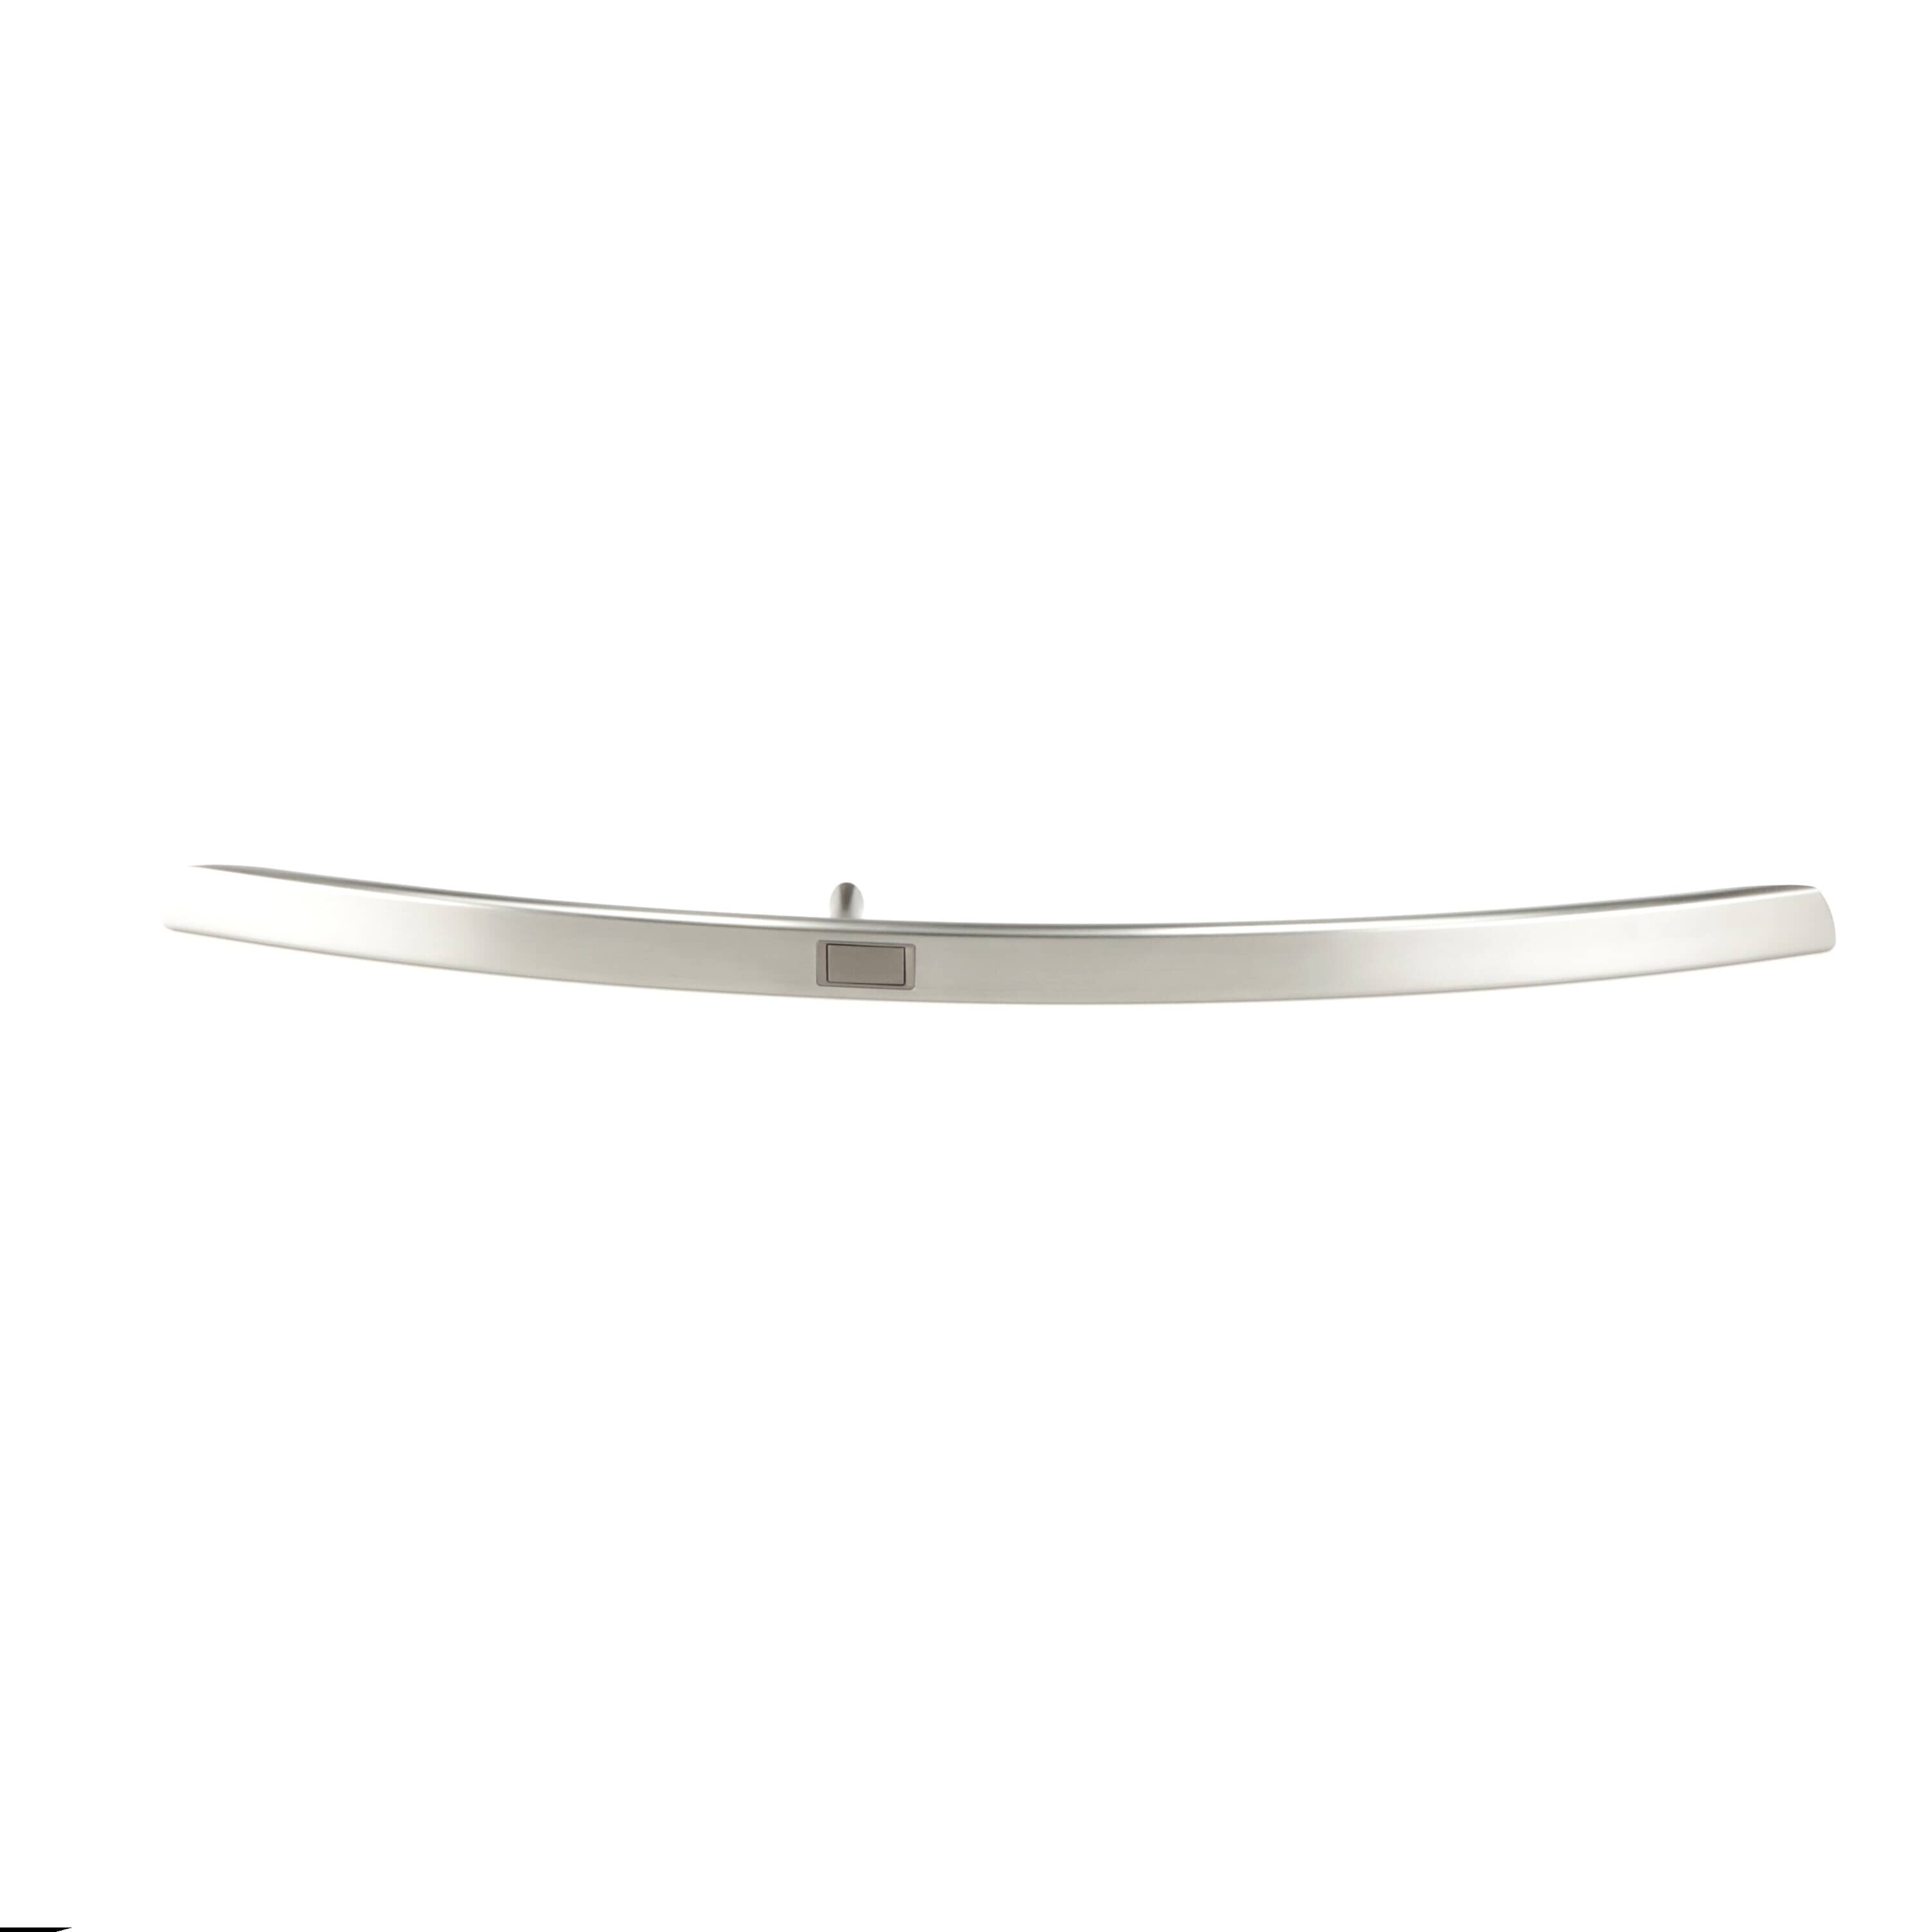 LG AED73593241 Refrigerator Handle Assembly